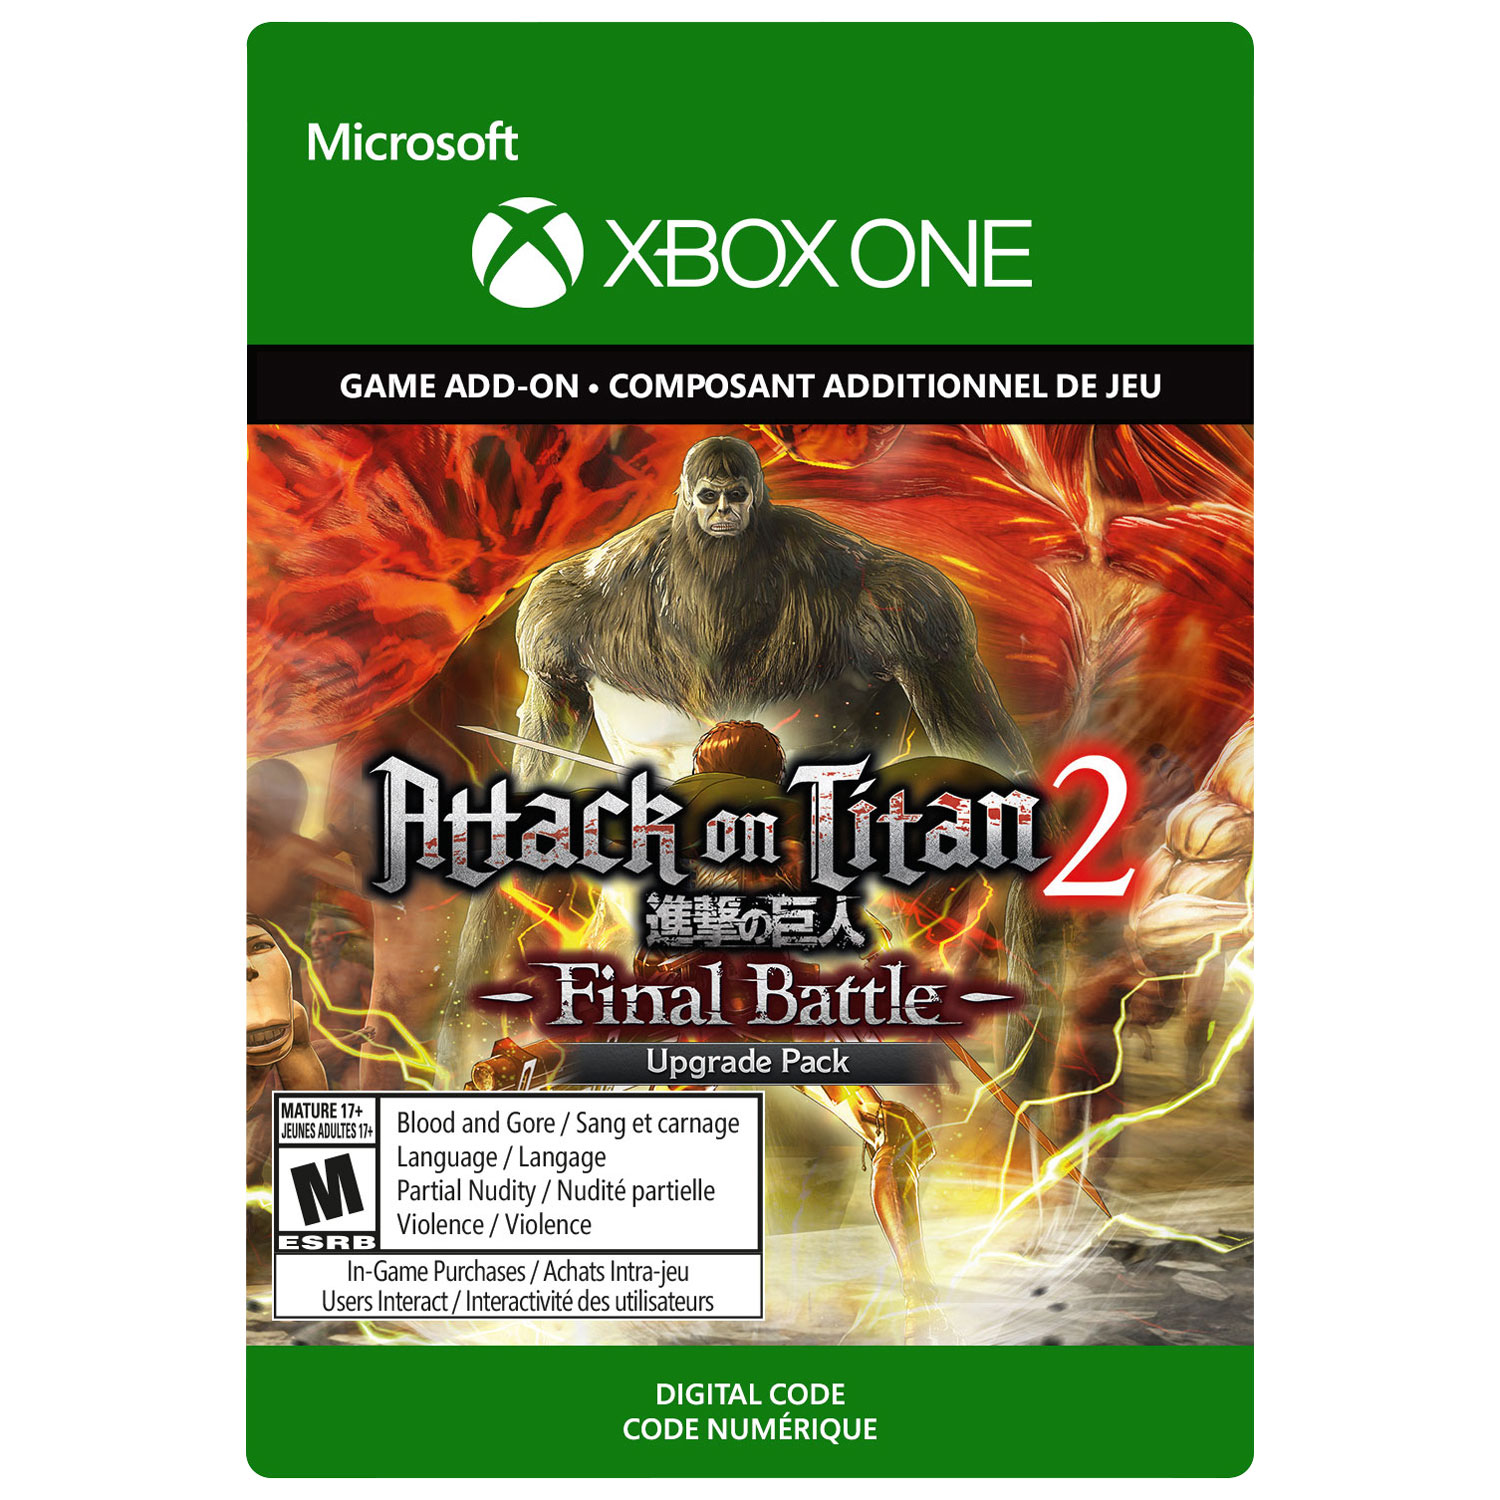 Attack on Titan 2: Final Battle Upgrade Pack (Xbox One) - Digital Download